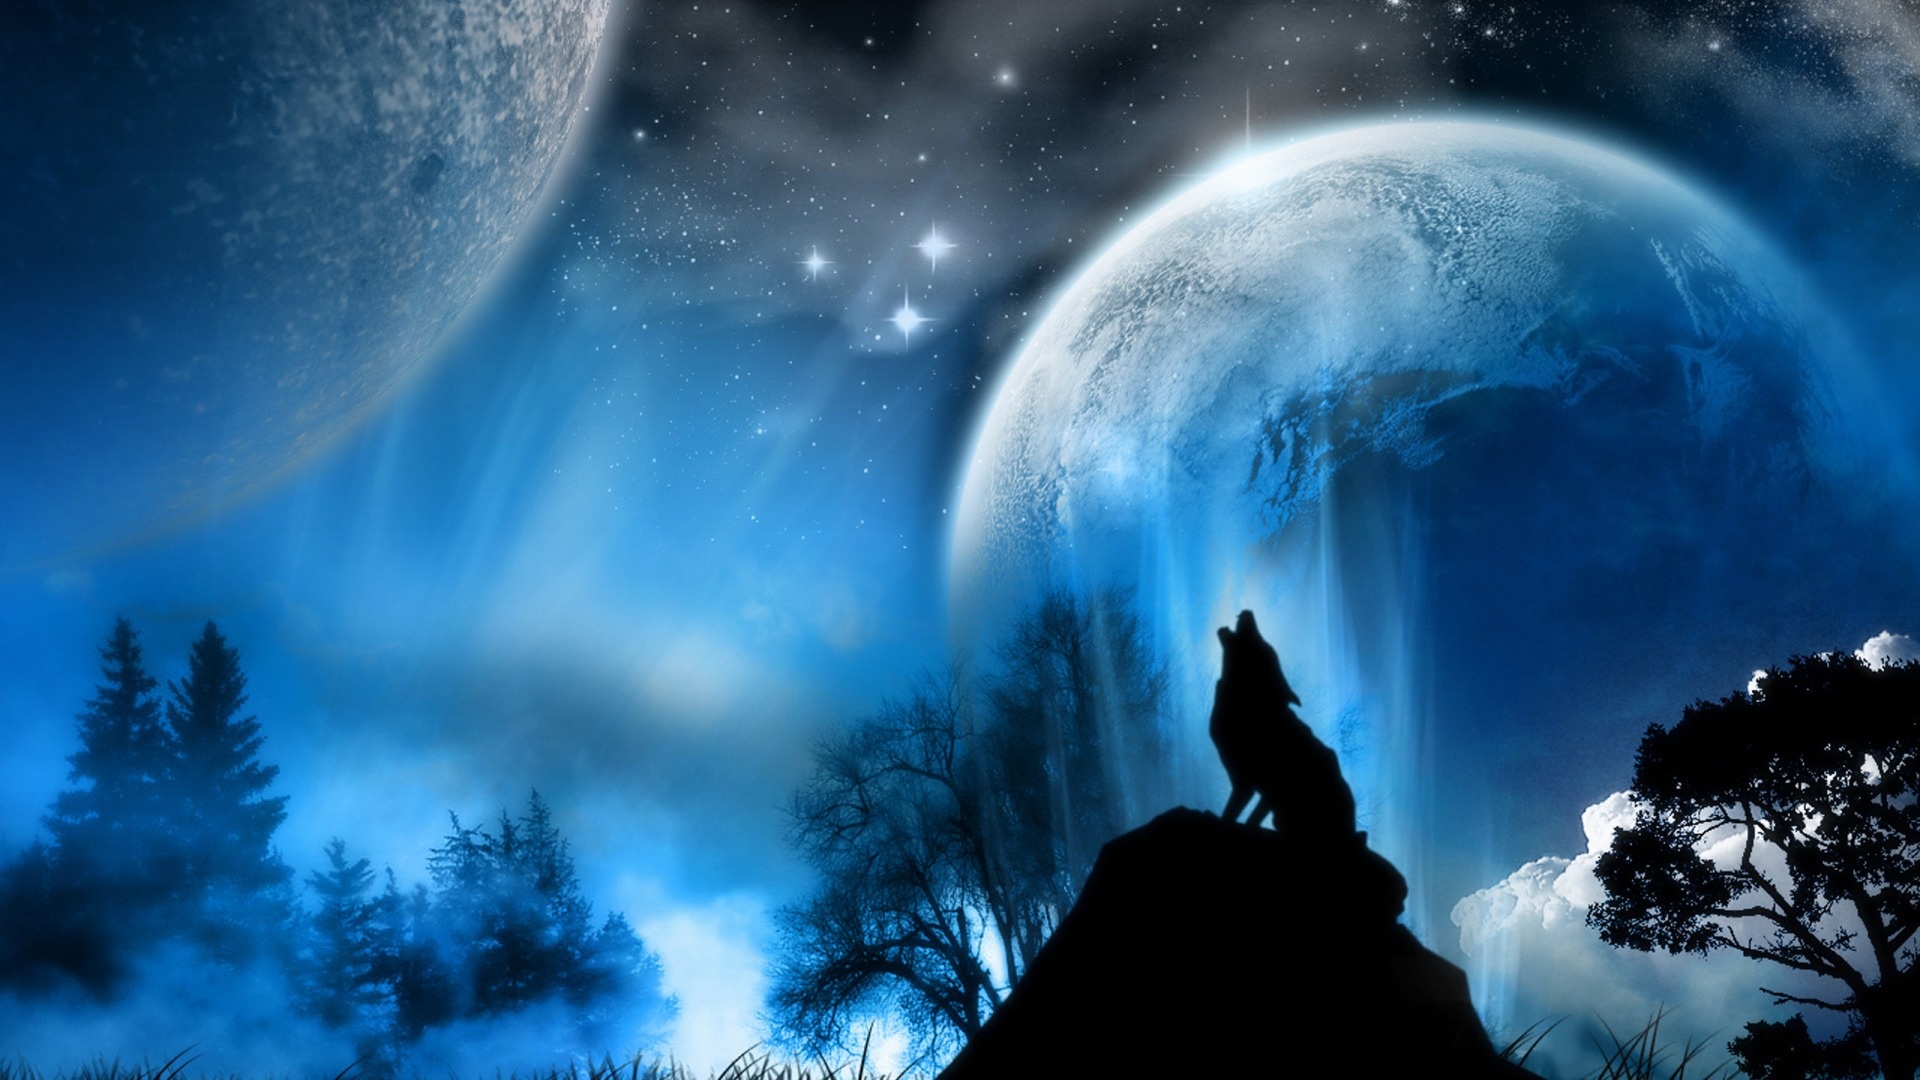 44+] Wolf Background Wallpaper on